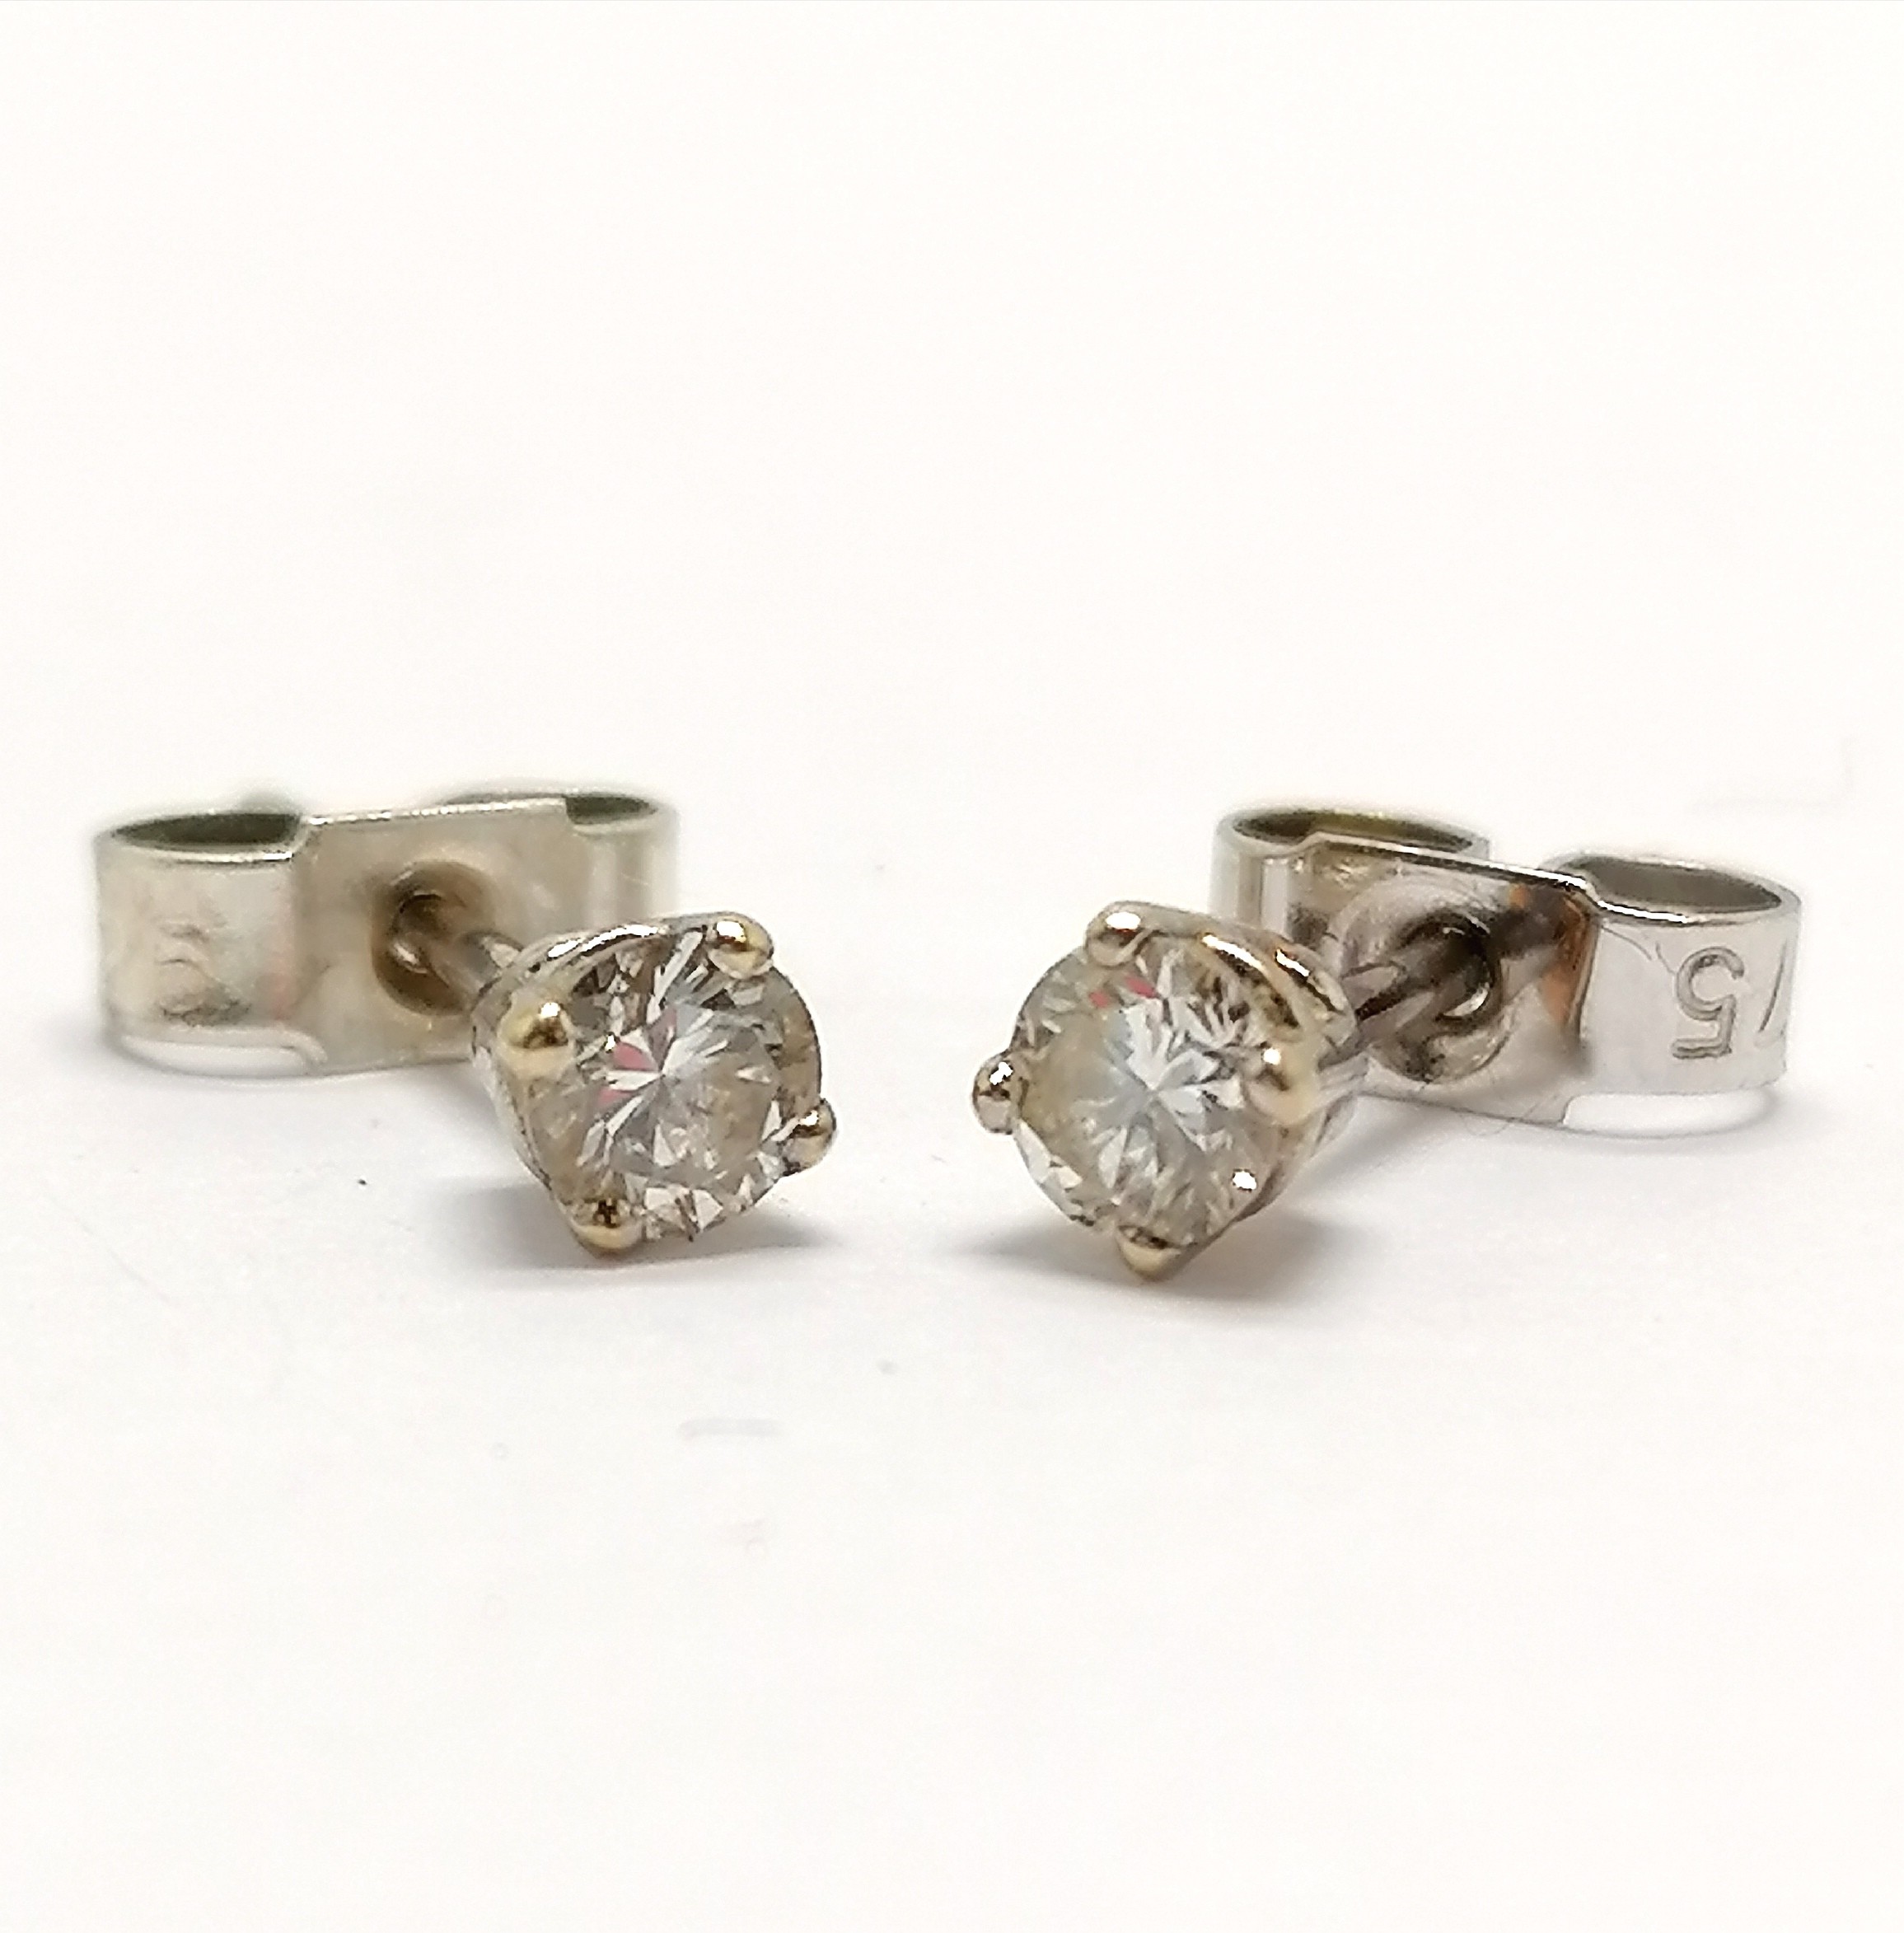 Pair of 9ct hallmarked white gold diamond (3mm diameter) stud earrings - 0.6g total weight